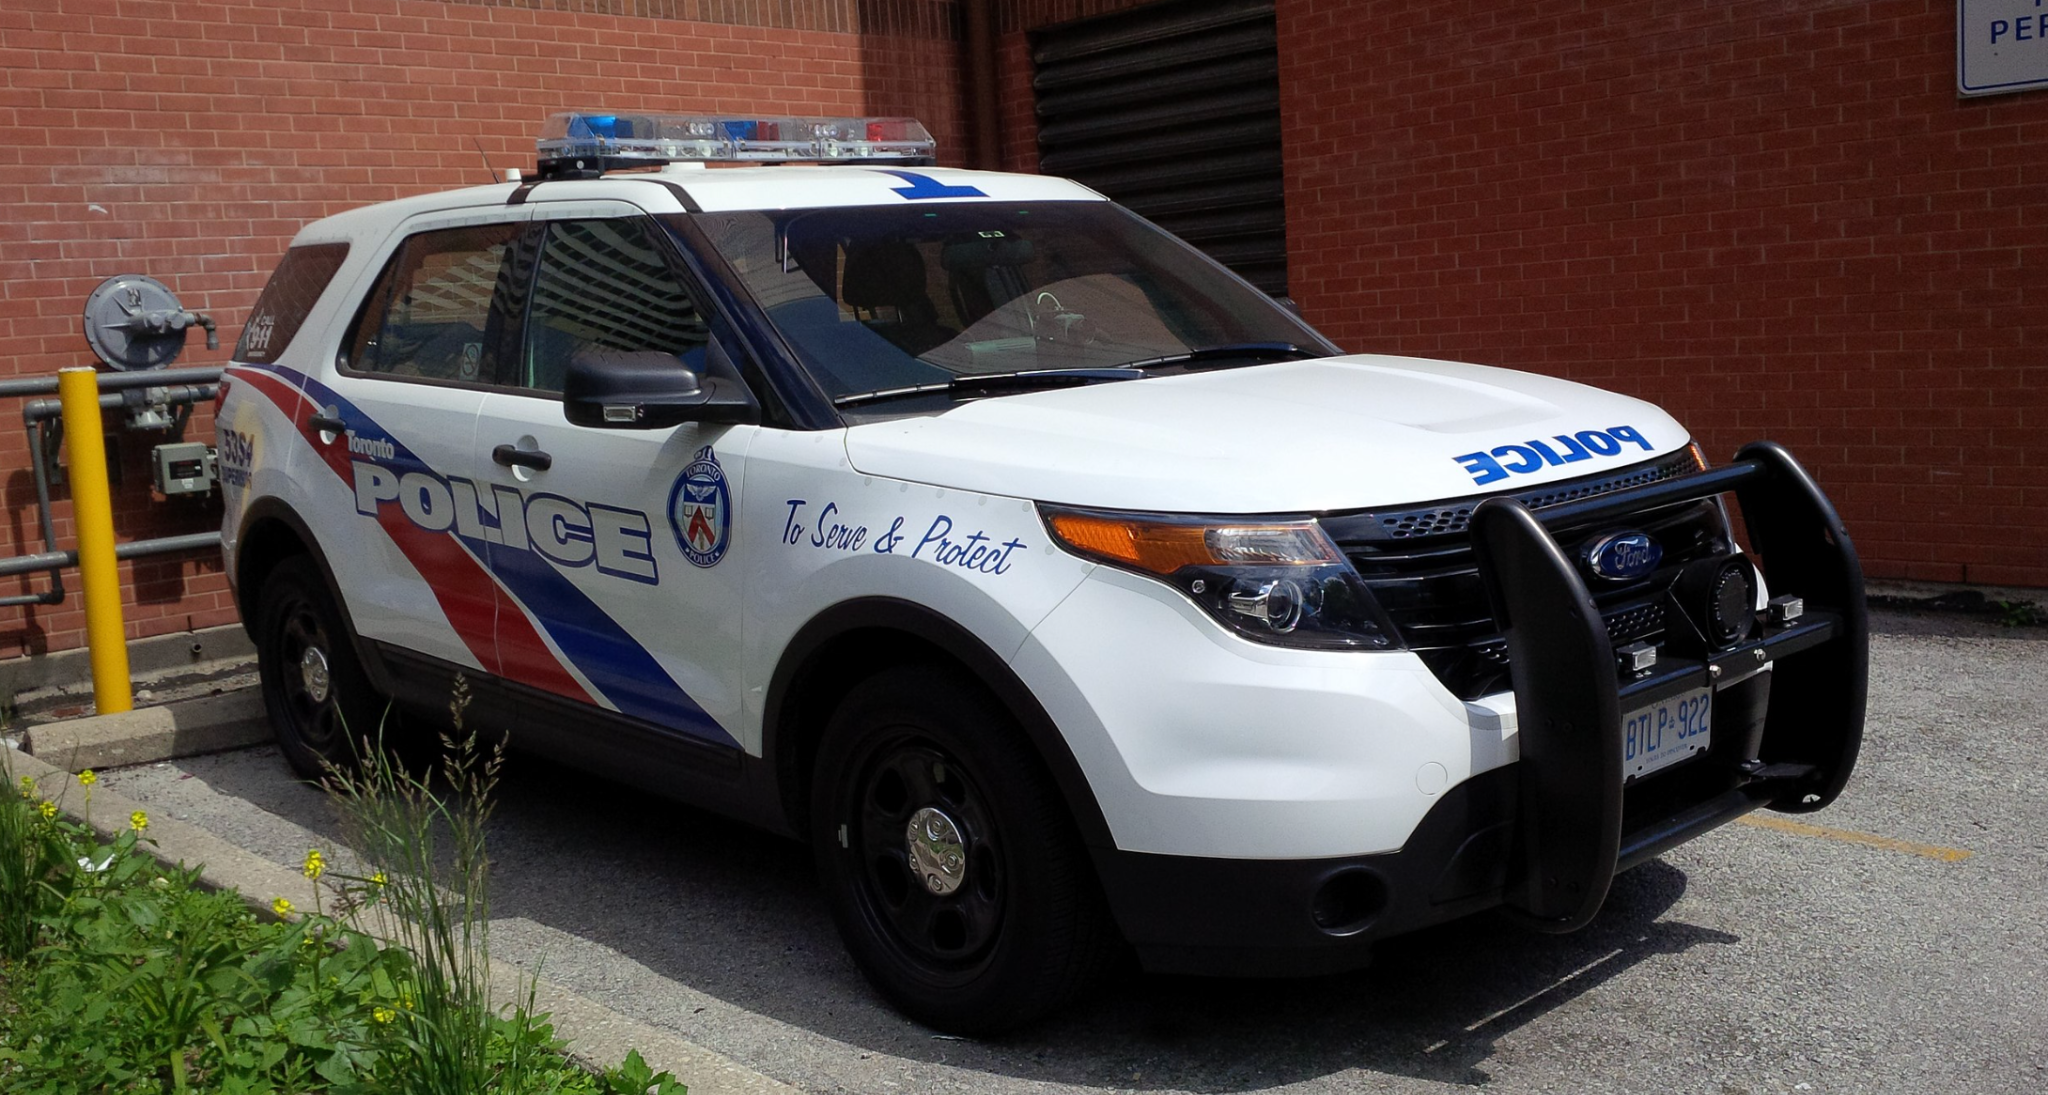 A Toronto Police Officer Was Allegedly Stealing A Missing Person's Stuff